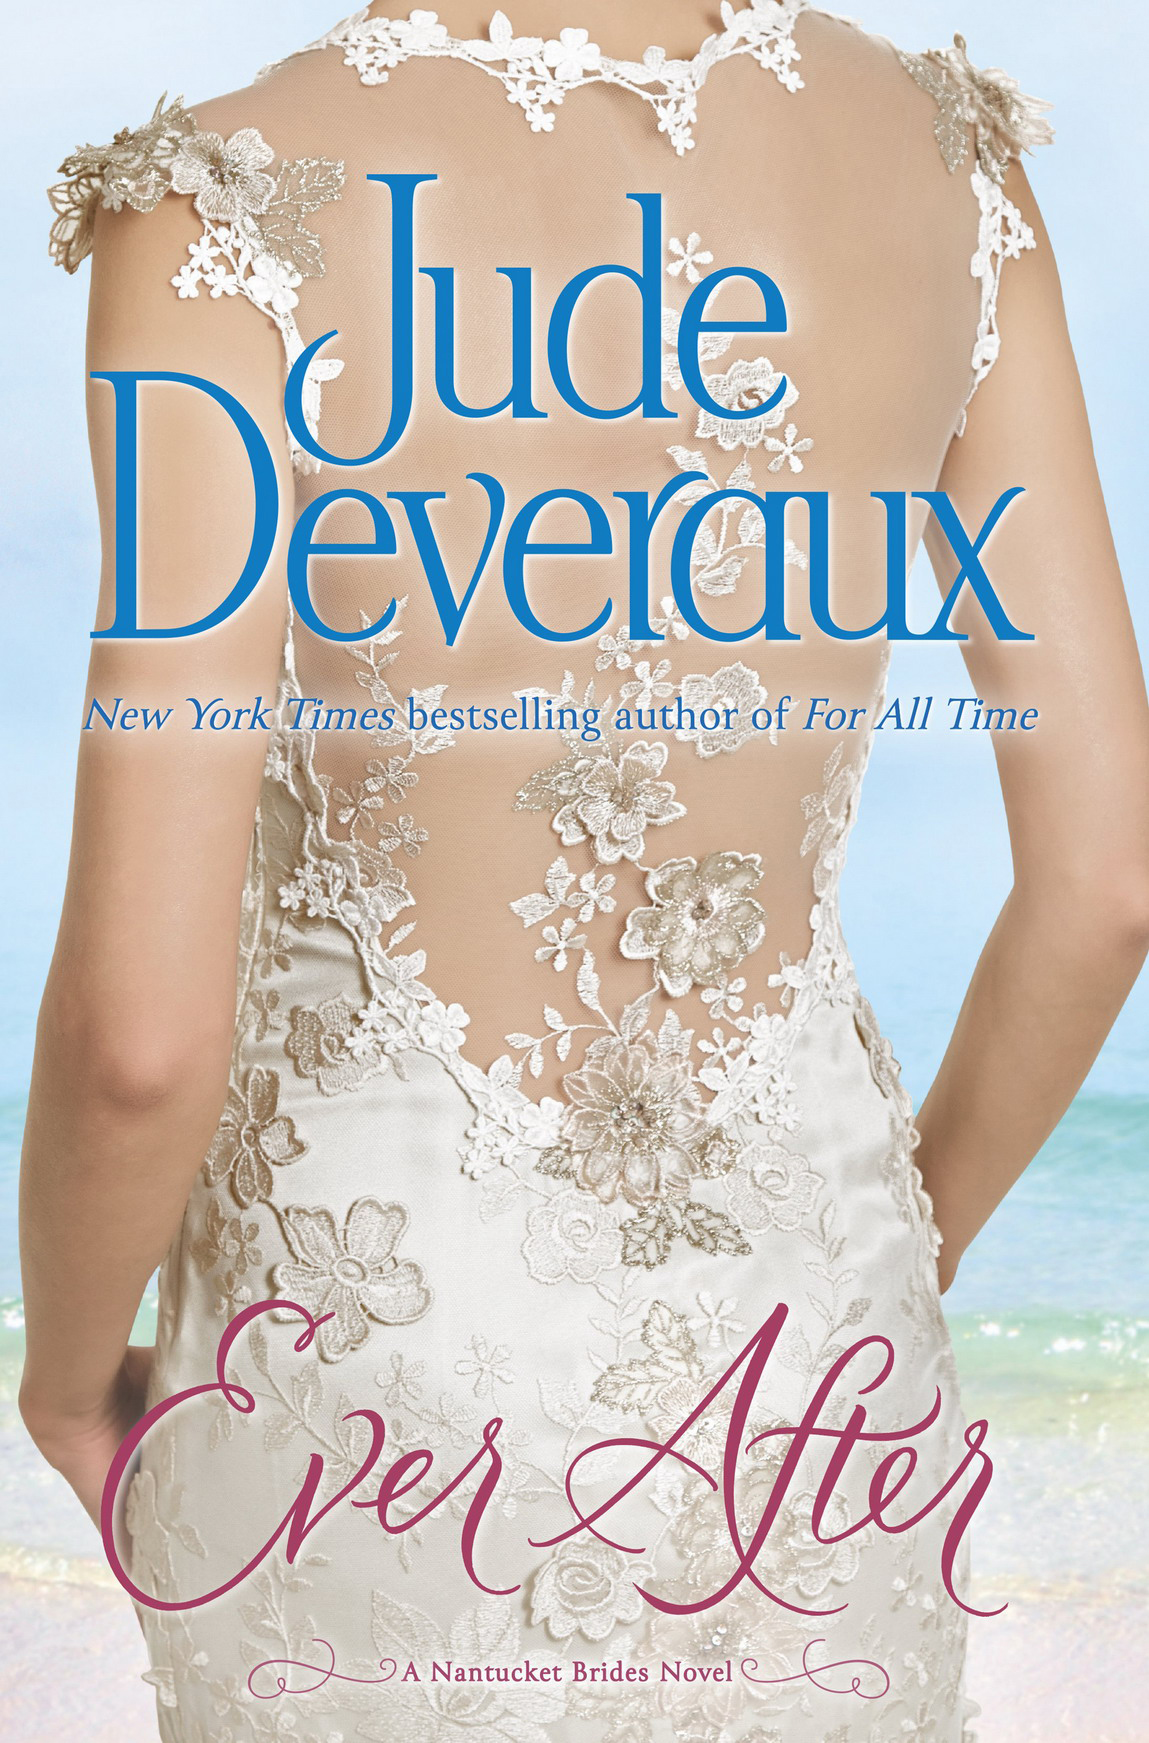 Ever After (2015) by Jude Deveraux